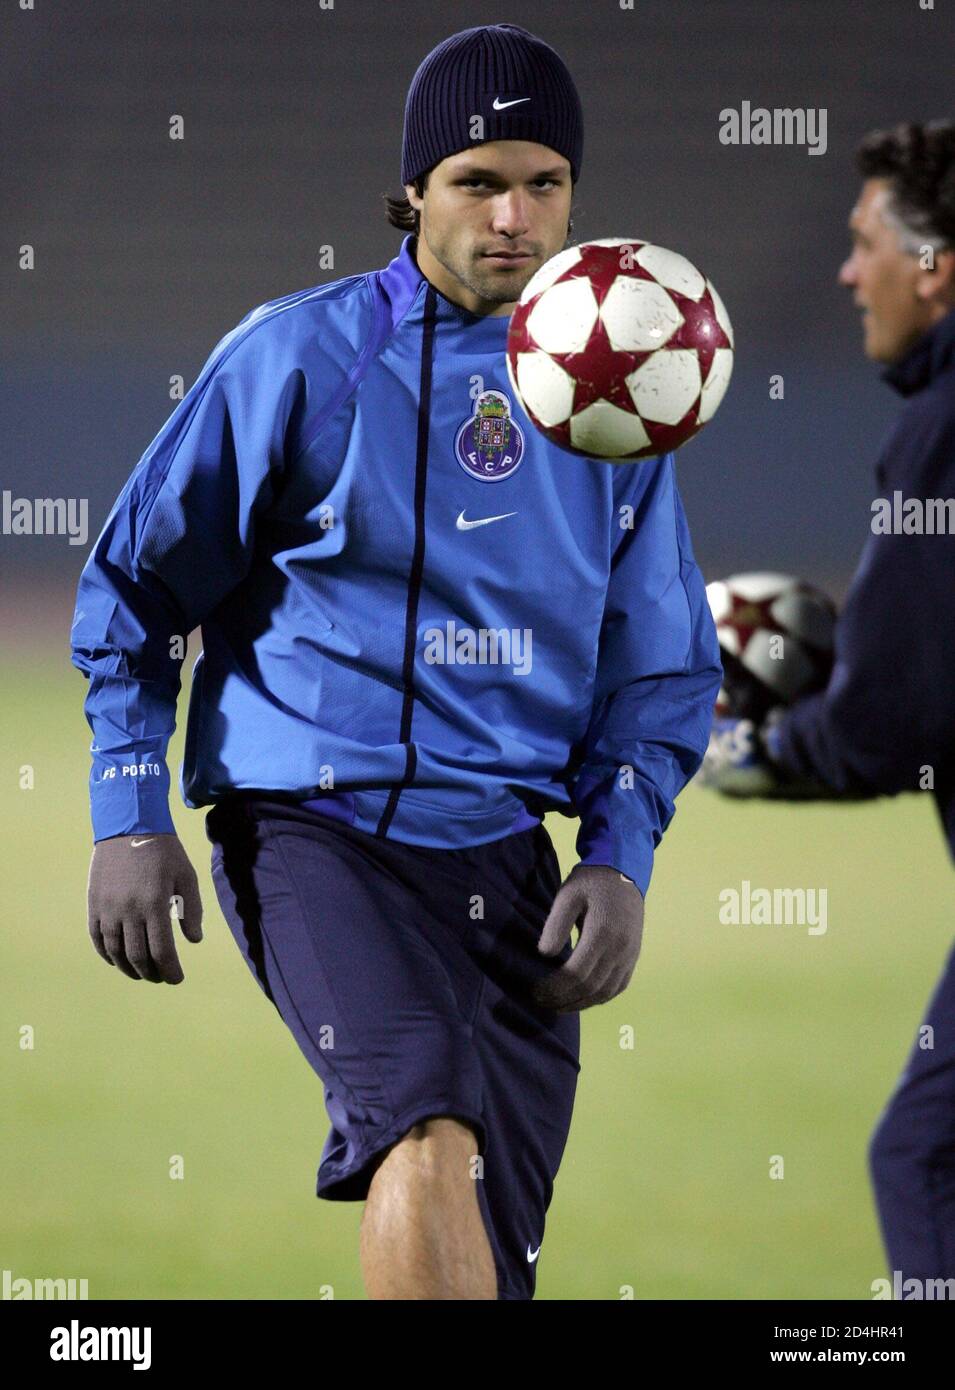 Portuguese FC Porto's midfielder Diego Ribas da Cunha of Brazil controls the ball during a practice session in Kawasaki, south of Tokyo, December 10, 2004. FC Porto is in Japan for the European-South American Cup club soccer championship against South-American club champion Once Caldas of Colombia on December 12. REUTERS/Issei Kato  IK/fa Stock Photo